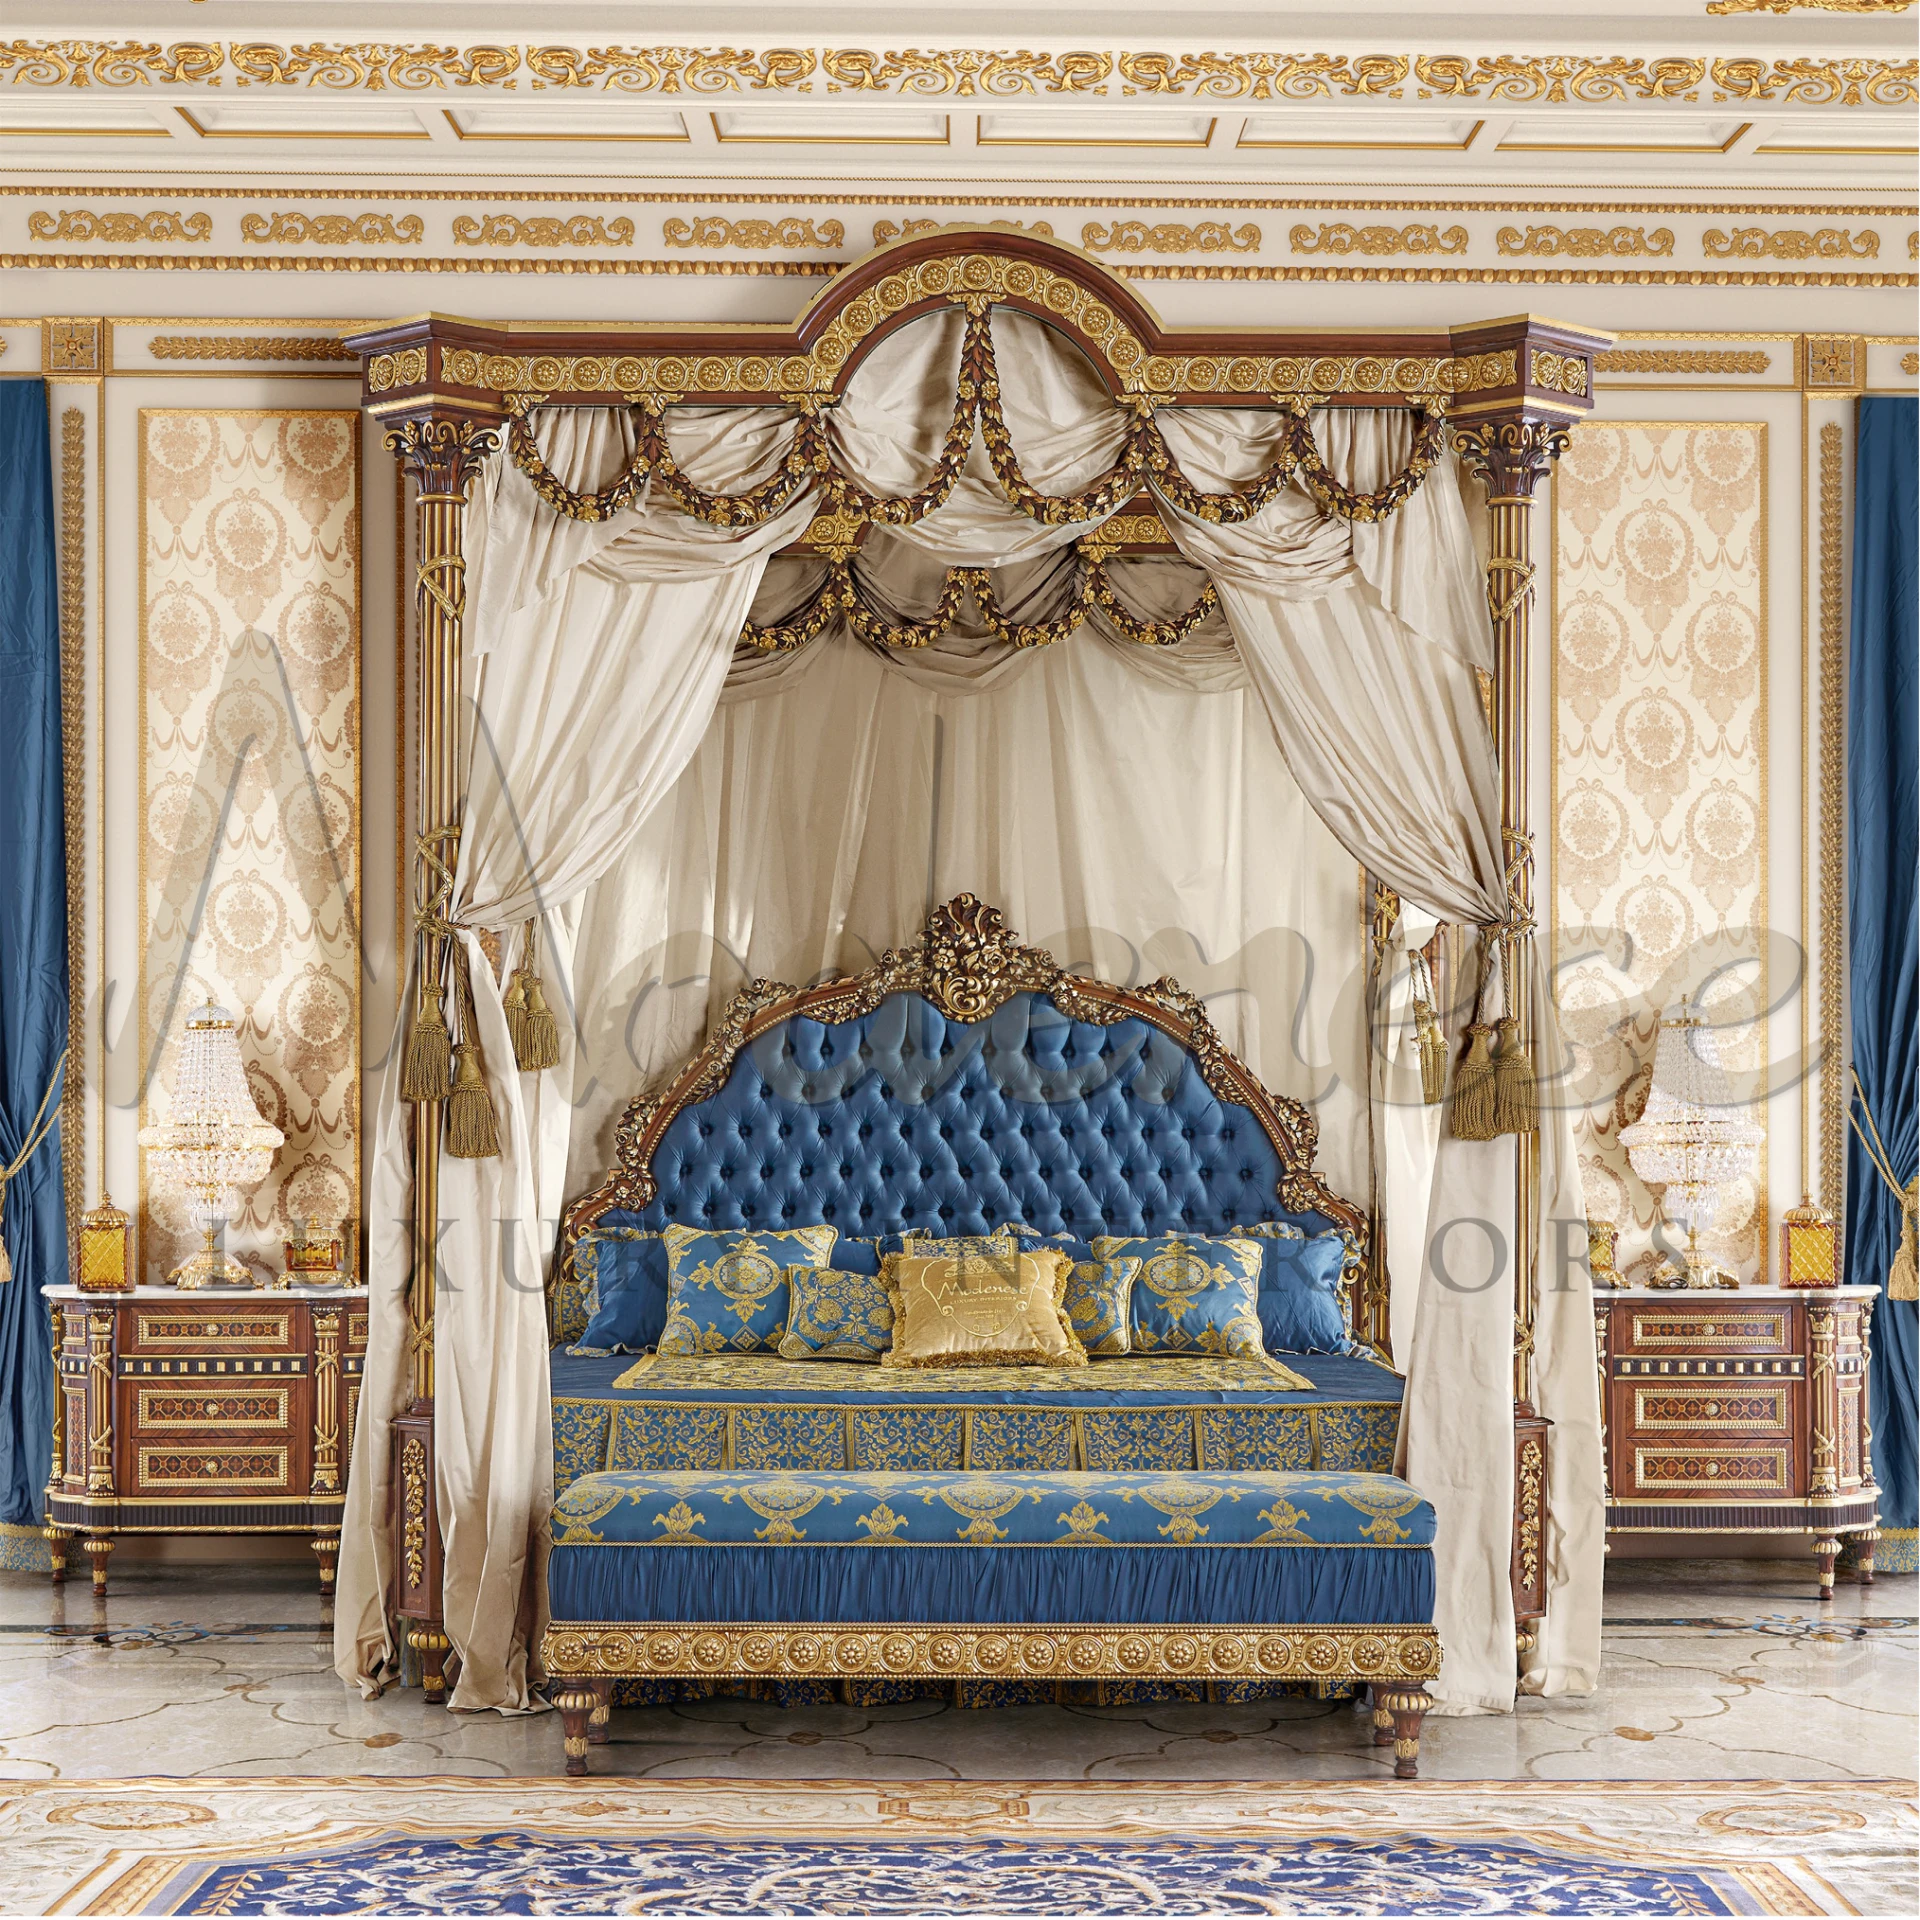 Luxury textiles define the Exquisite Italian Bed Cover, offering a peaceful and inviting sleeping environment with unparalleled craftsmanship.